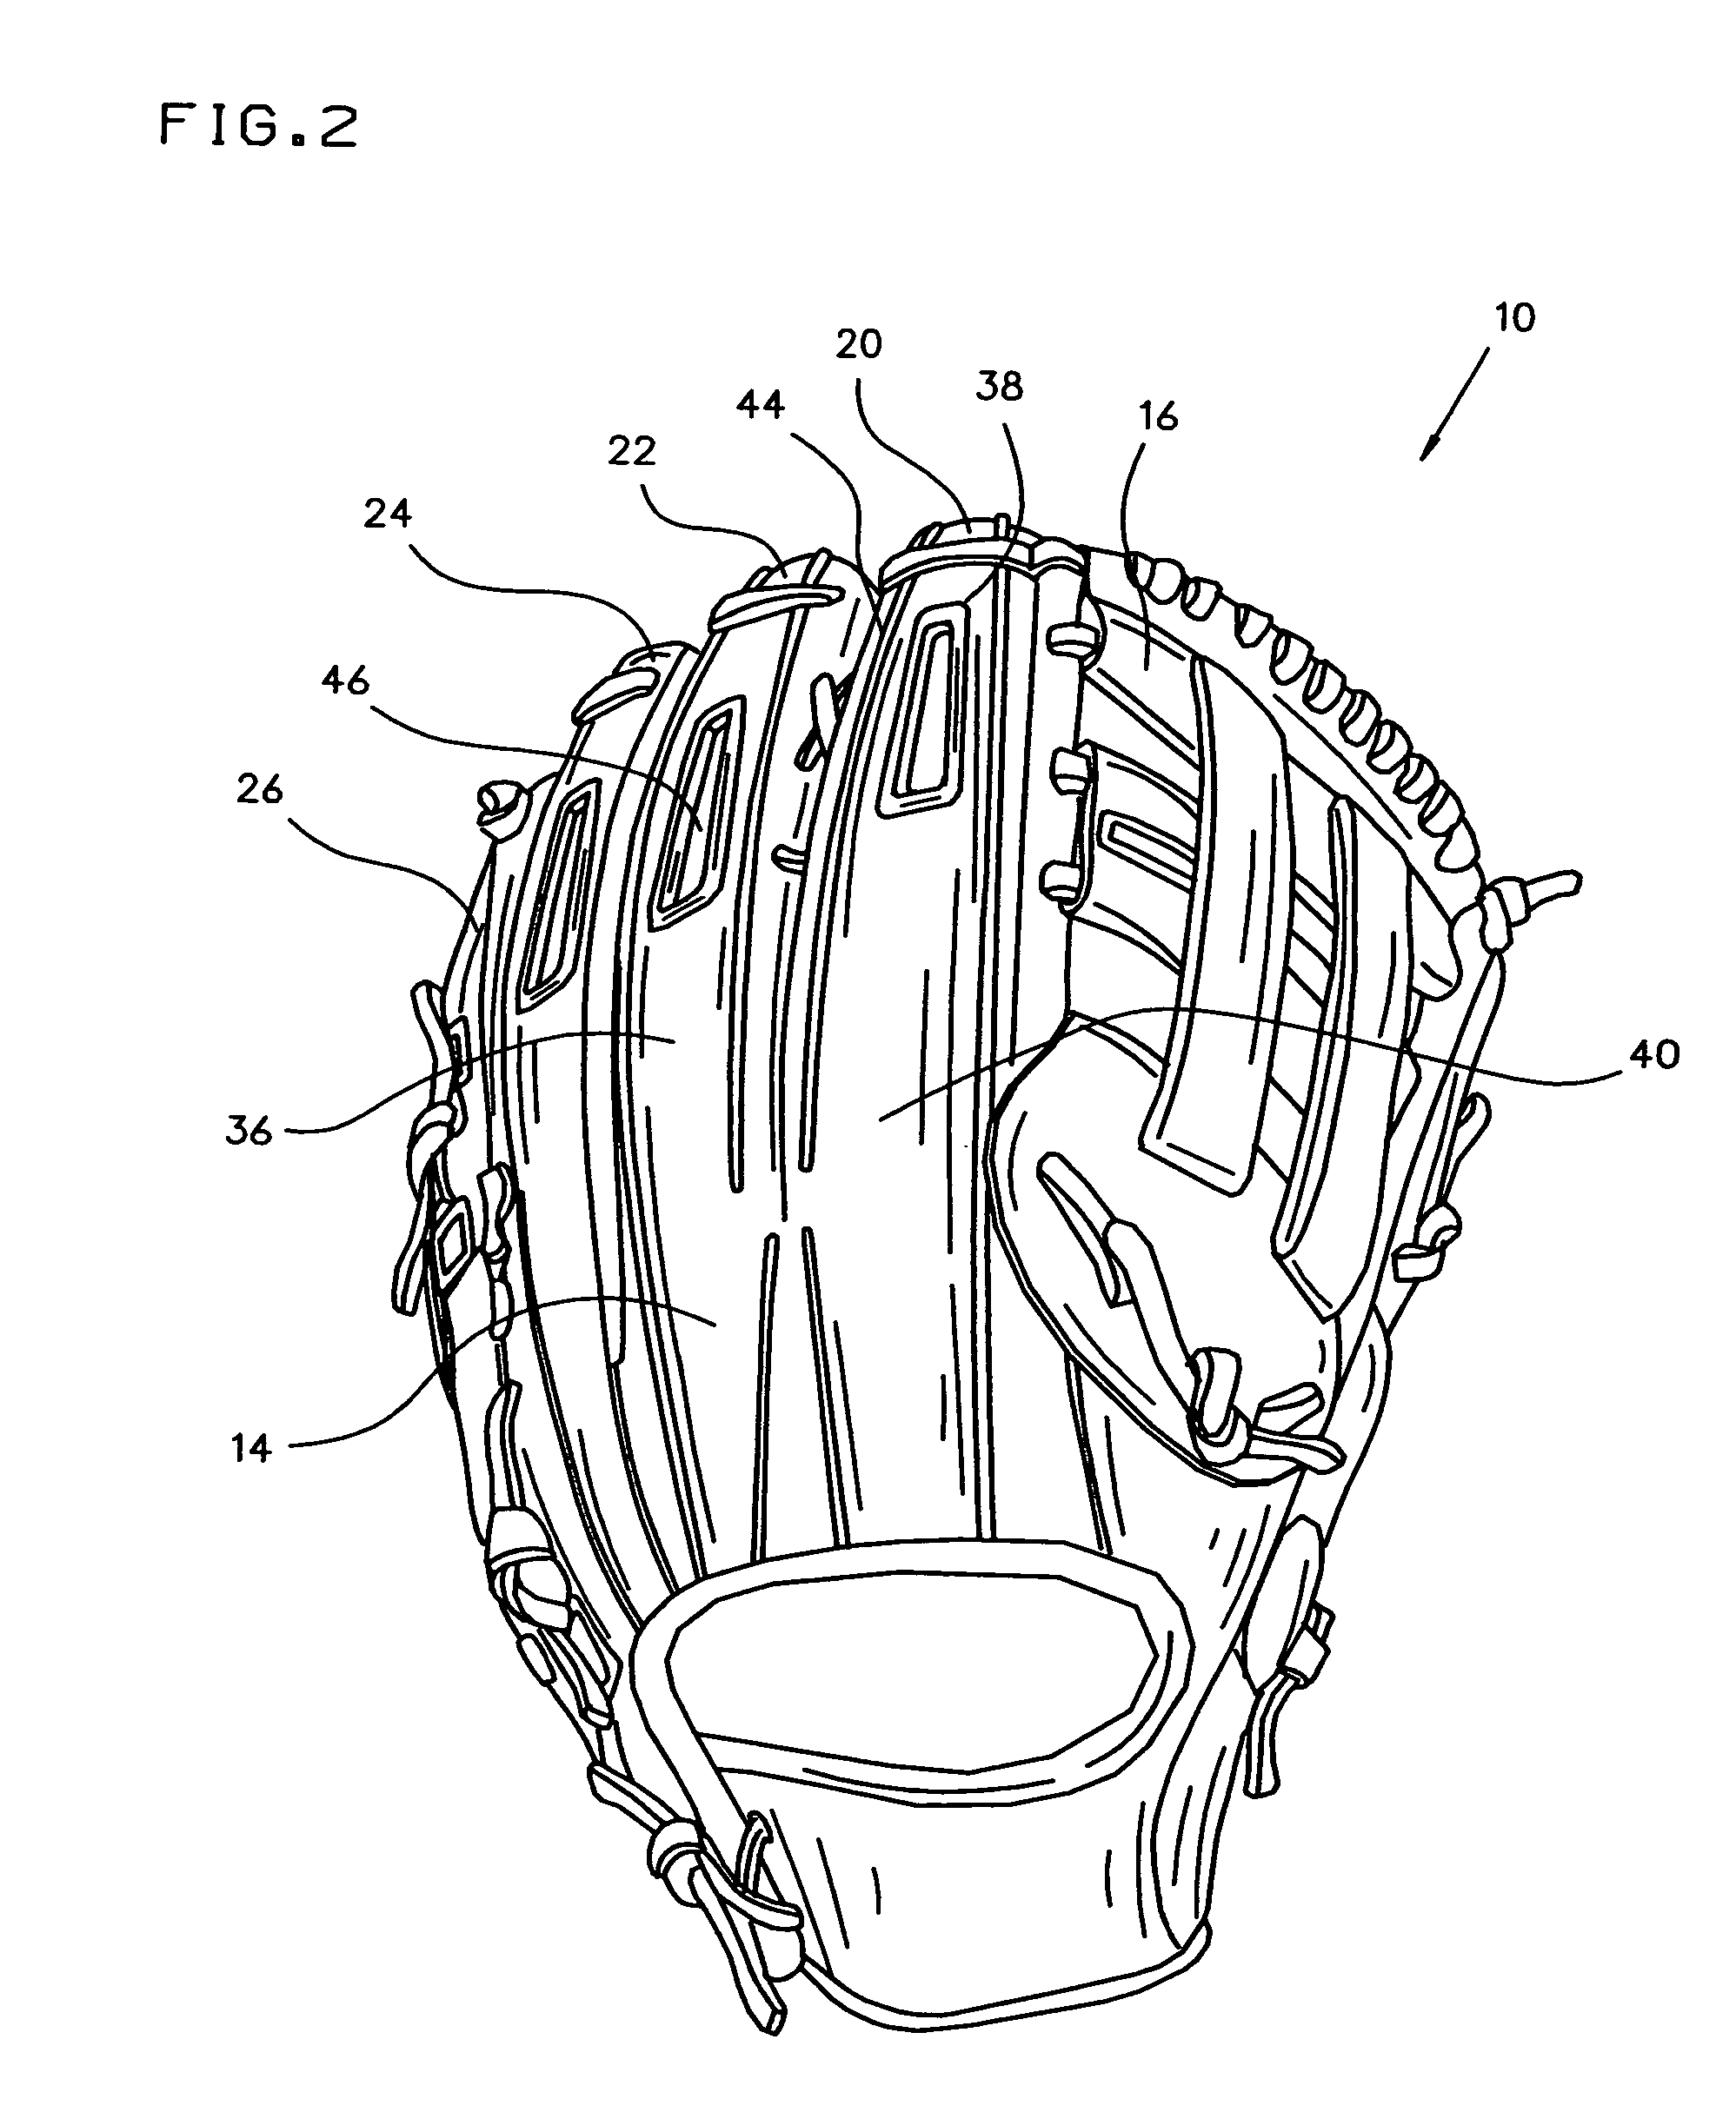 Ball glove having openings and improved weight balance